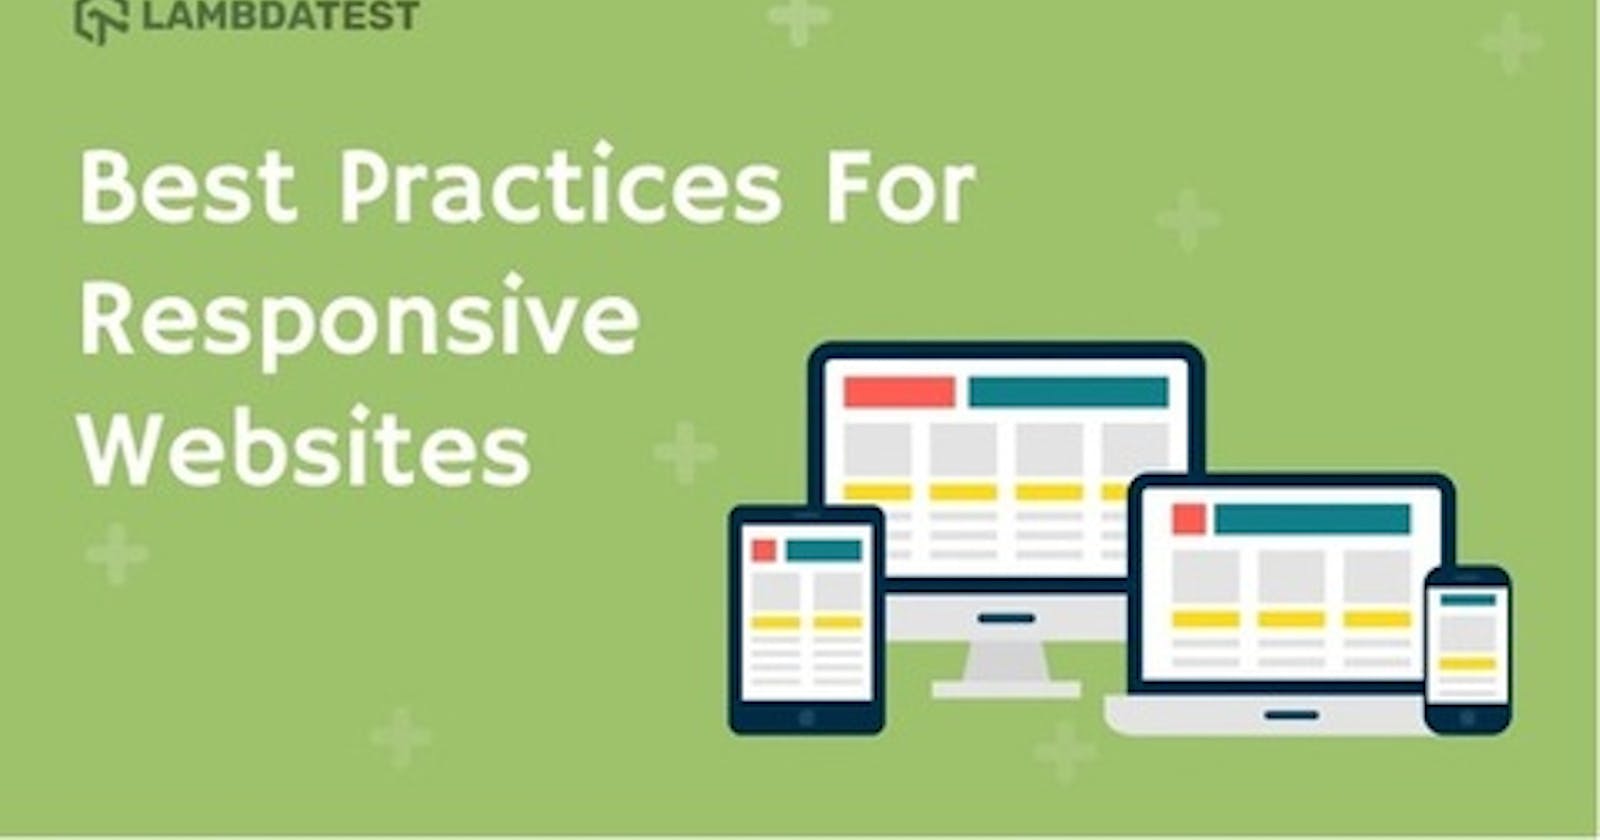 7 Best Practices For Responsive Websites [With Examples]